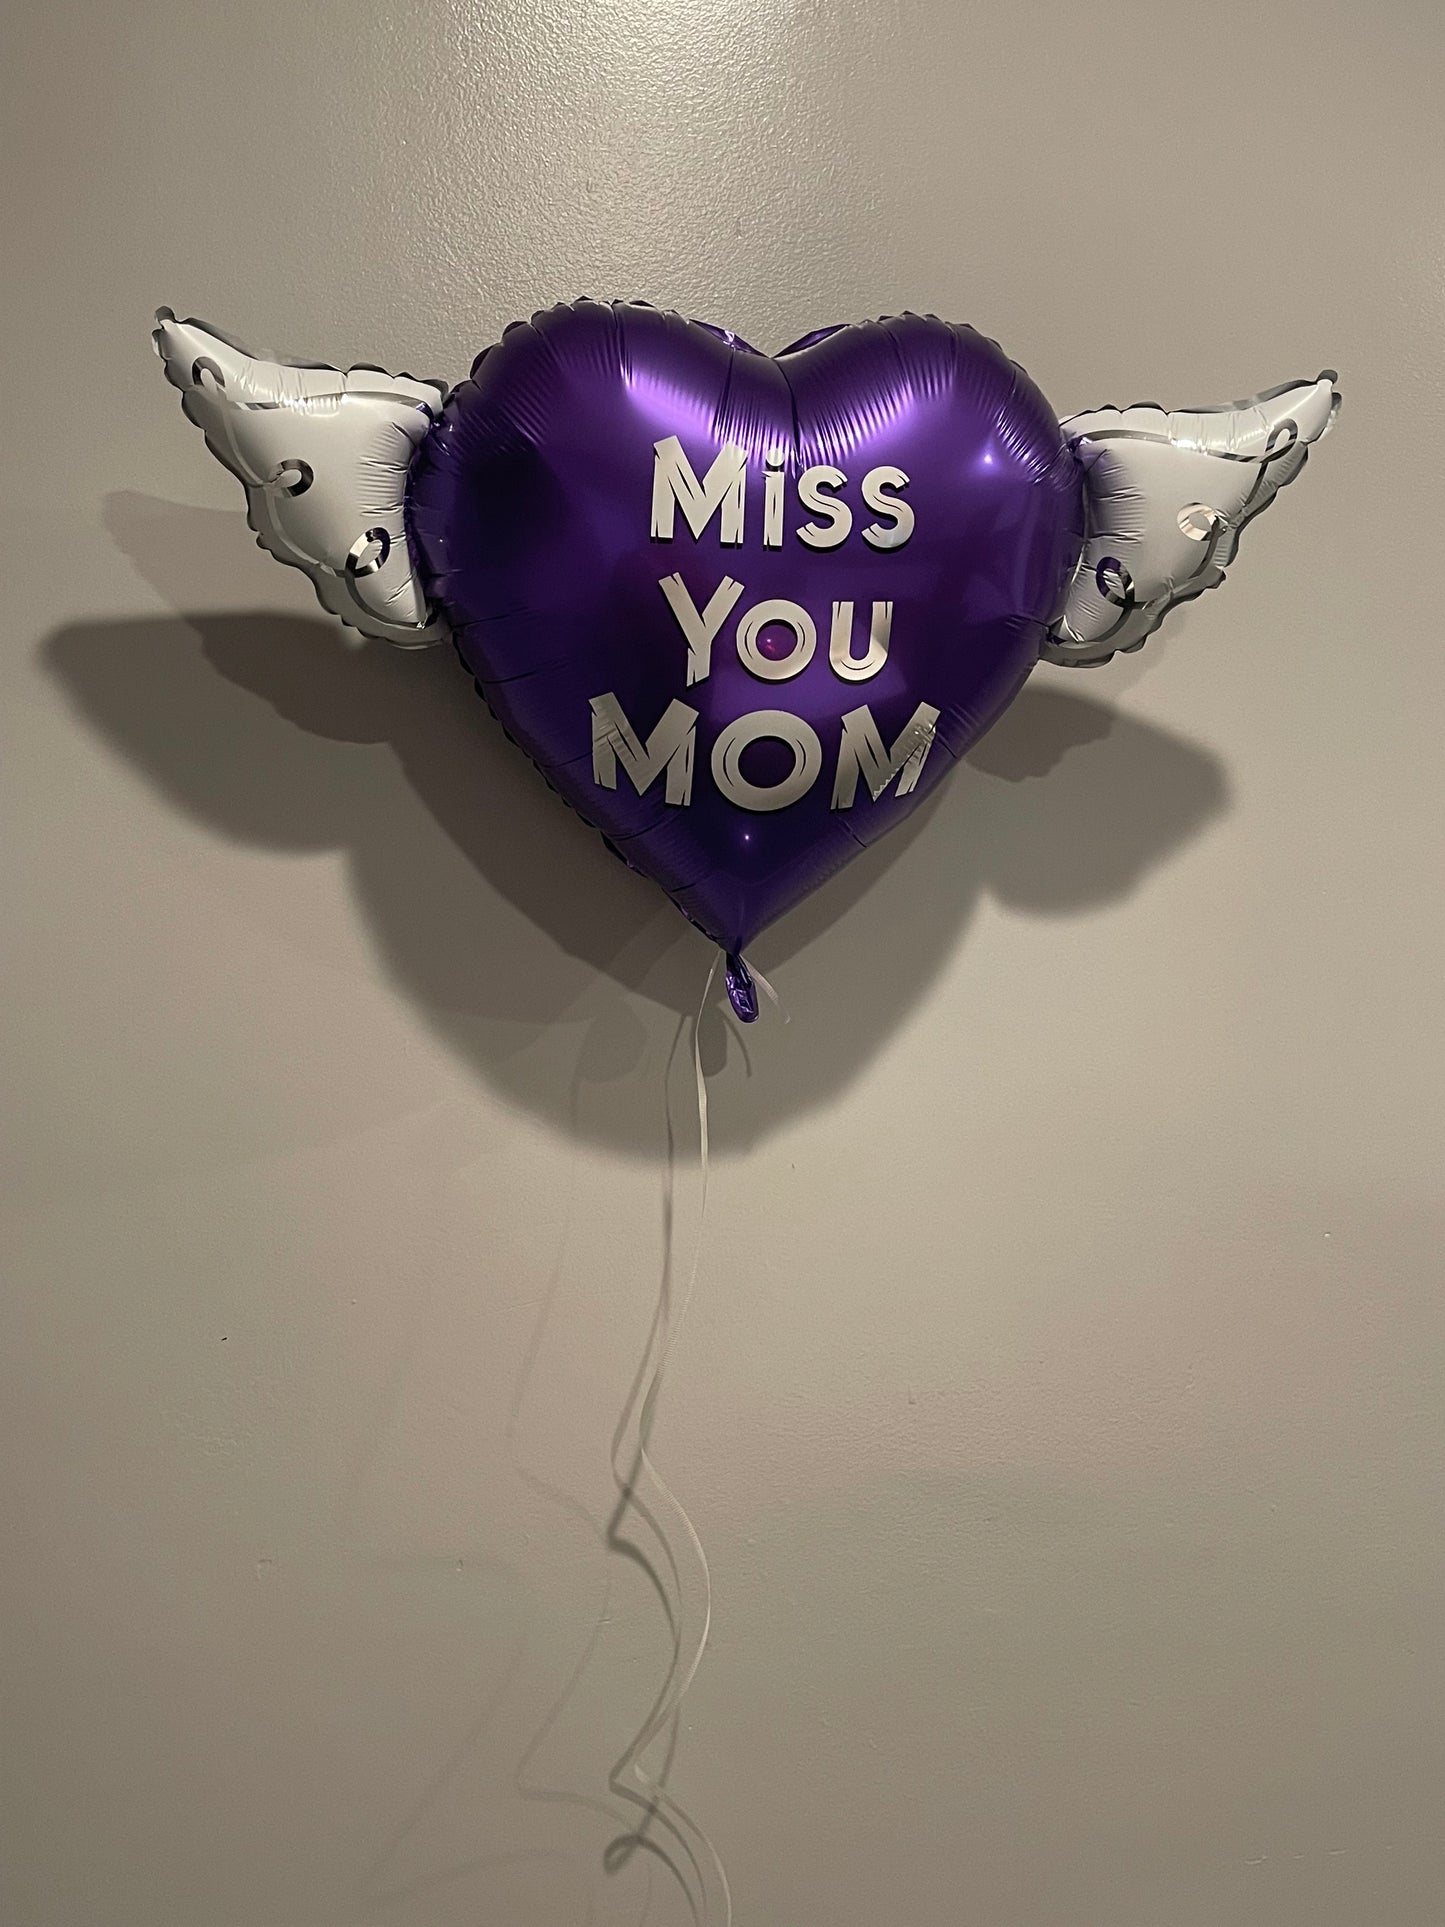 Miss You Mom Heavenly Balloons ™ Heart Shaped with angel wings (Purple)